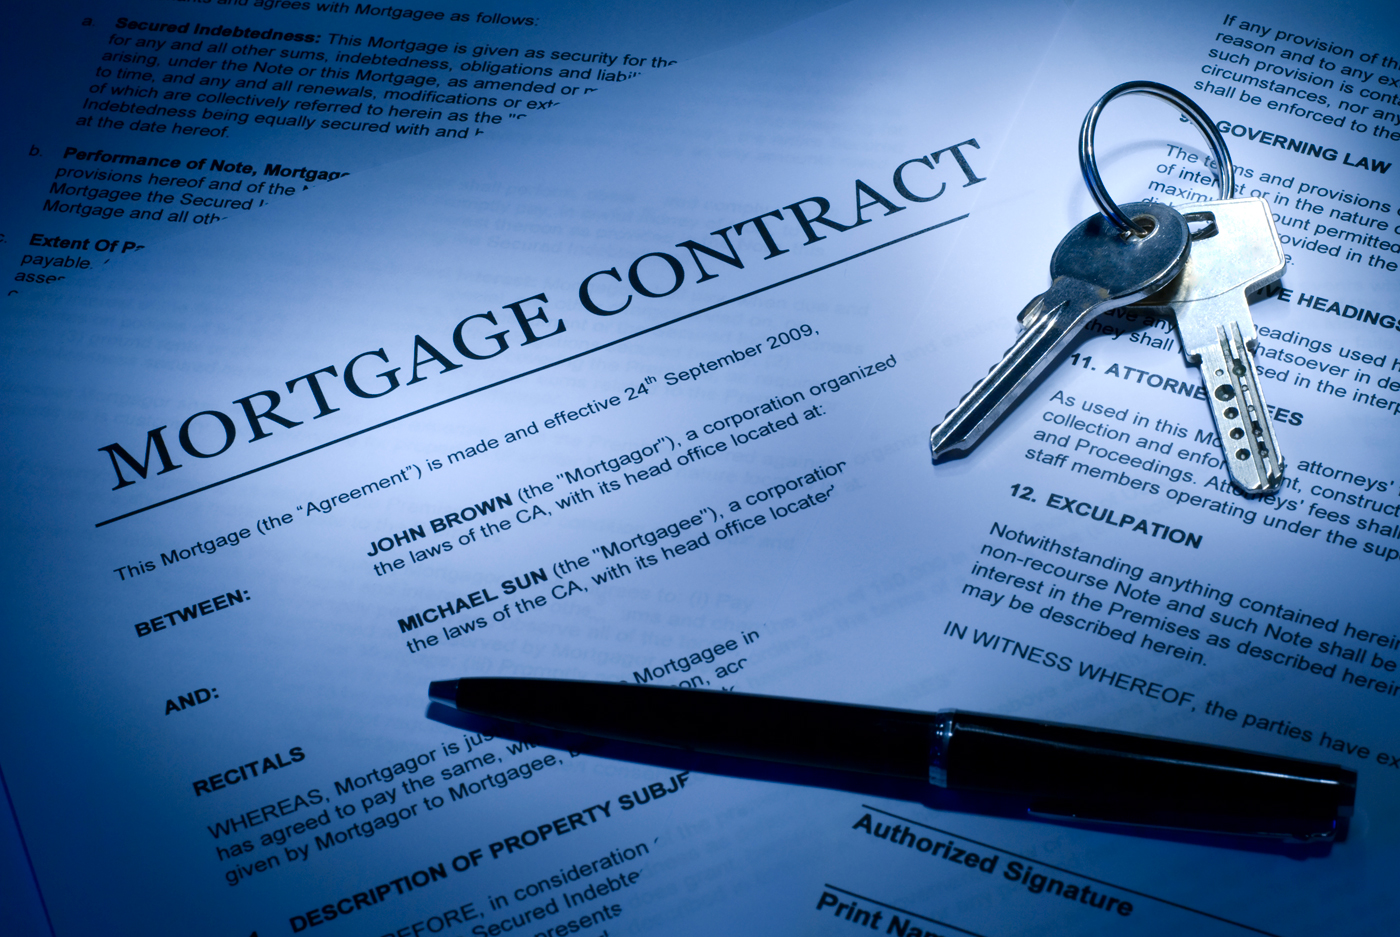 Mortgage taking stays strong in  April despite holidays